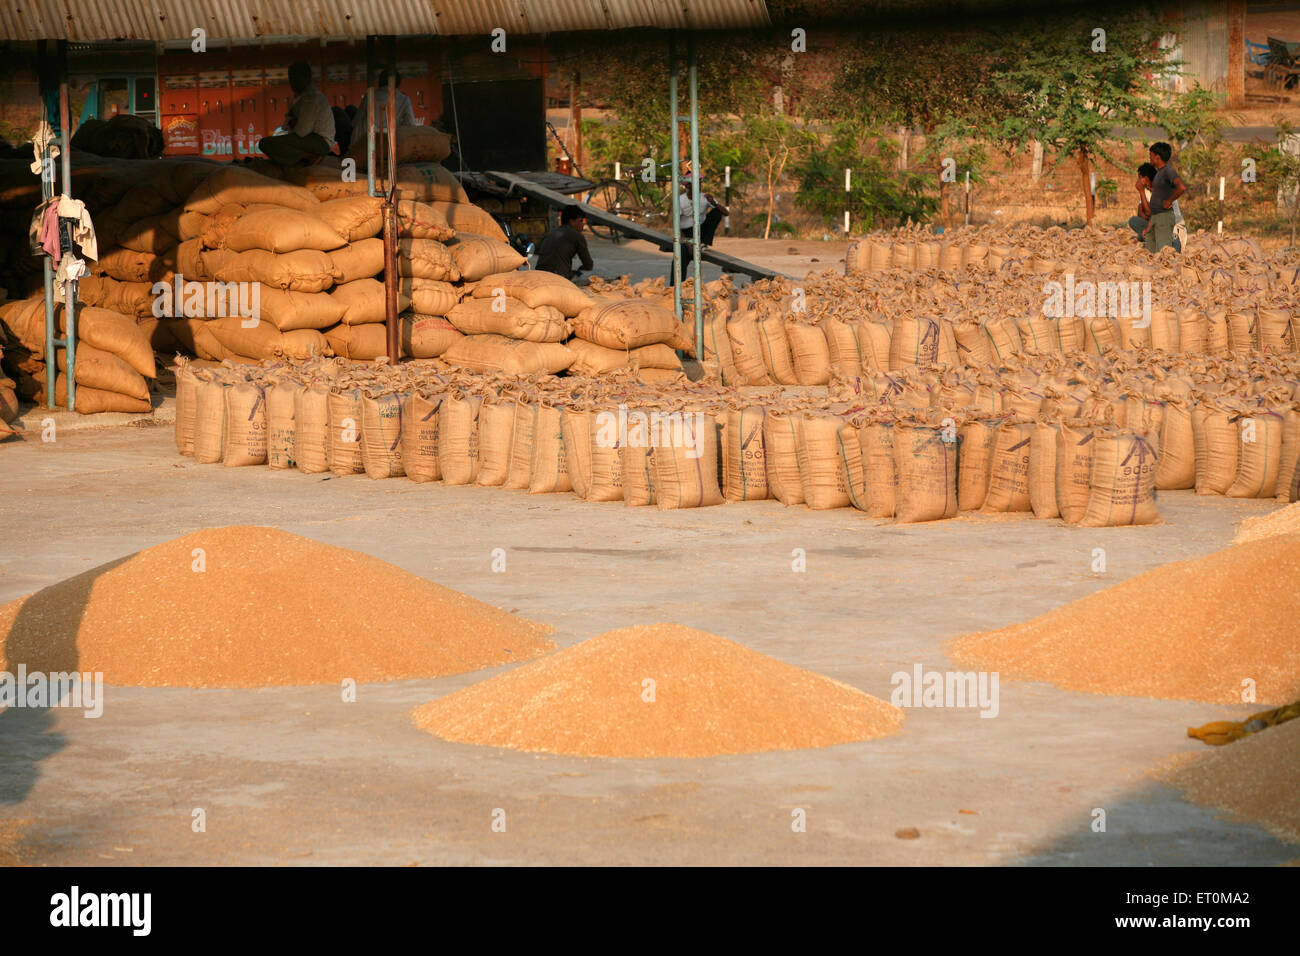 Stacks of jute bags consisting of food grains lined up and stocks of wheat at Harsud Mandi ; food grains market in Bhopal Stock Photo